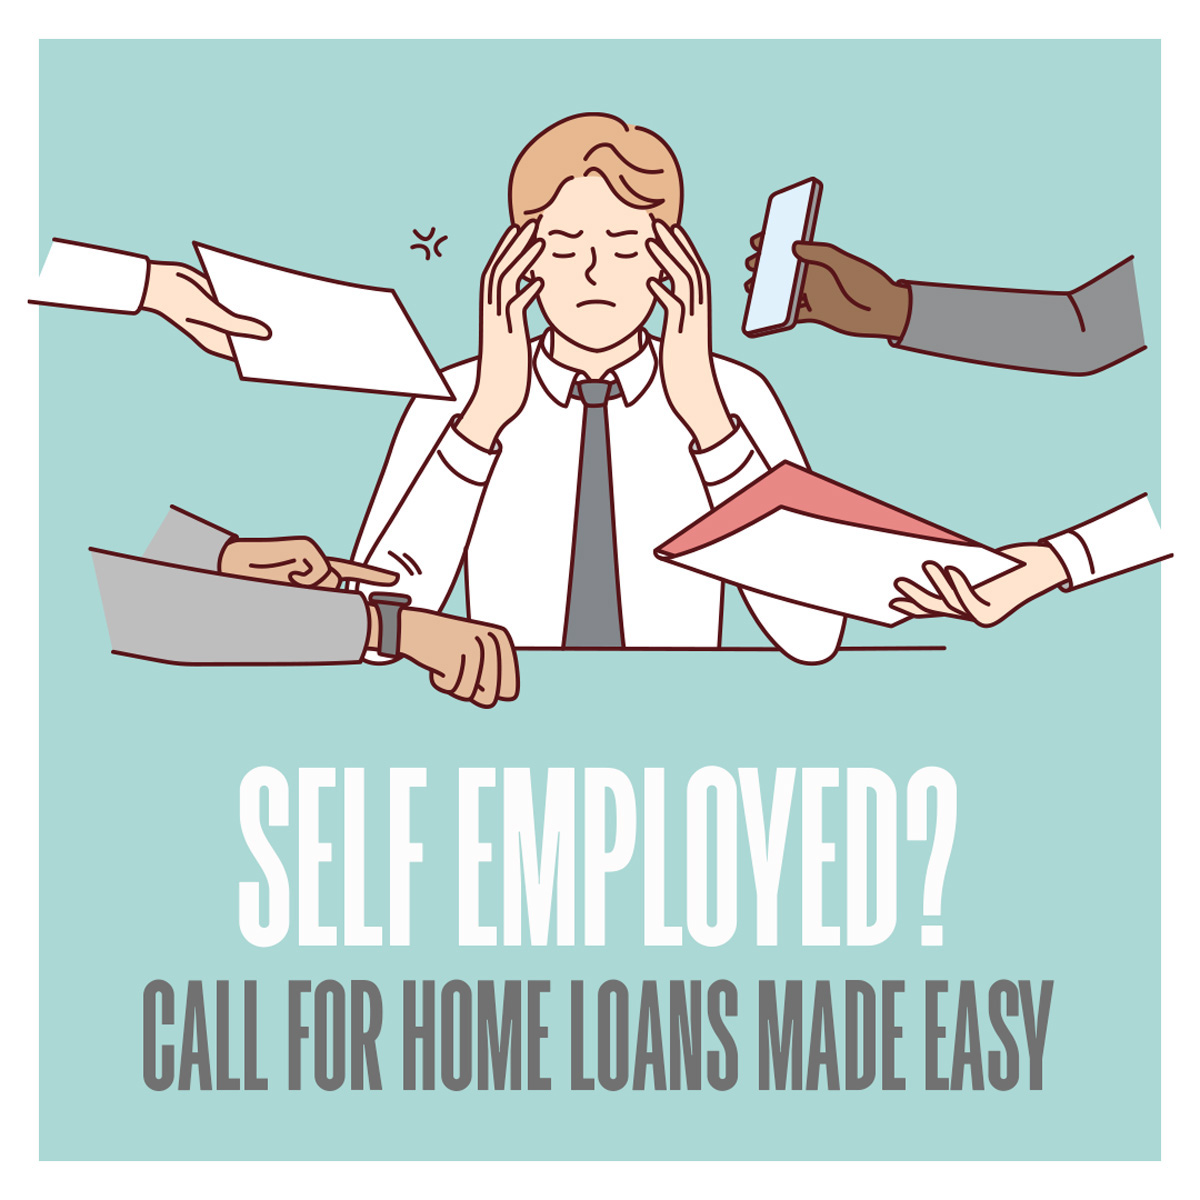 Being self-employed can make it difficult to apply for a mortgage, but not when you work with me. With a bank statement loan, you can qualify using your bank statements only. Message me today to learn more. #theromanteam #provenresults #conceirgeservice #knowthefacts